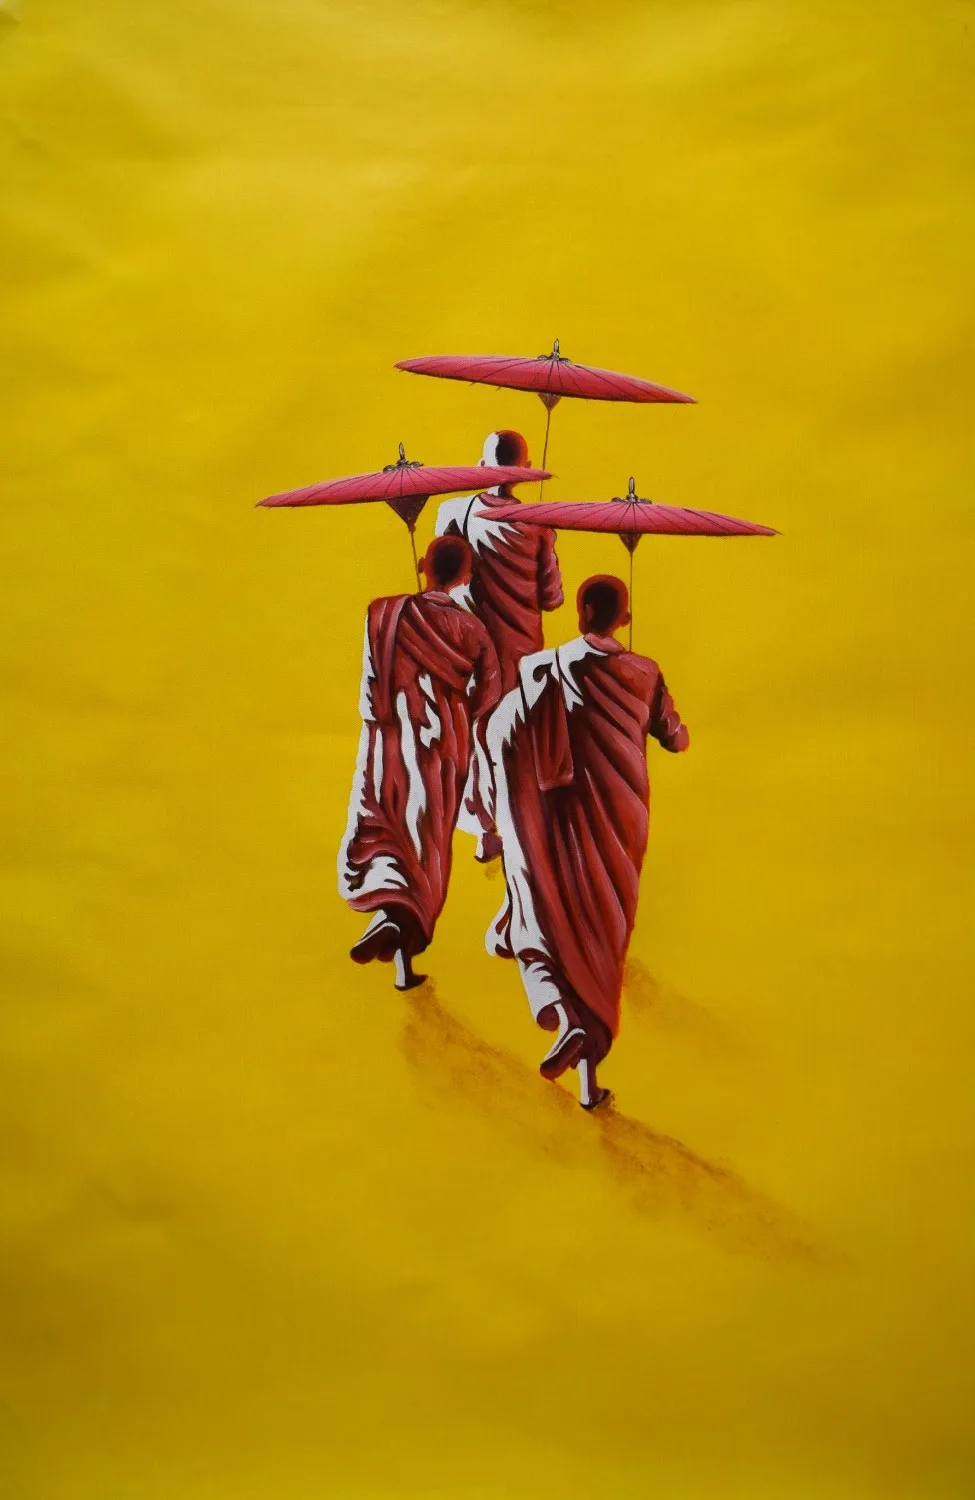 High Quality Hand Painted Oil Painting on Canvas Yellow Background Monk  CanvasPainting Wall Art Picture Painting for Home Decor _ - AliExpress  Mobile